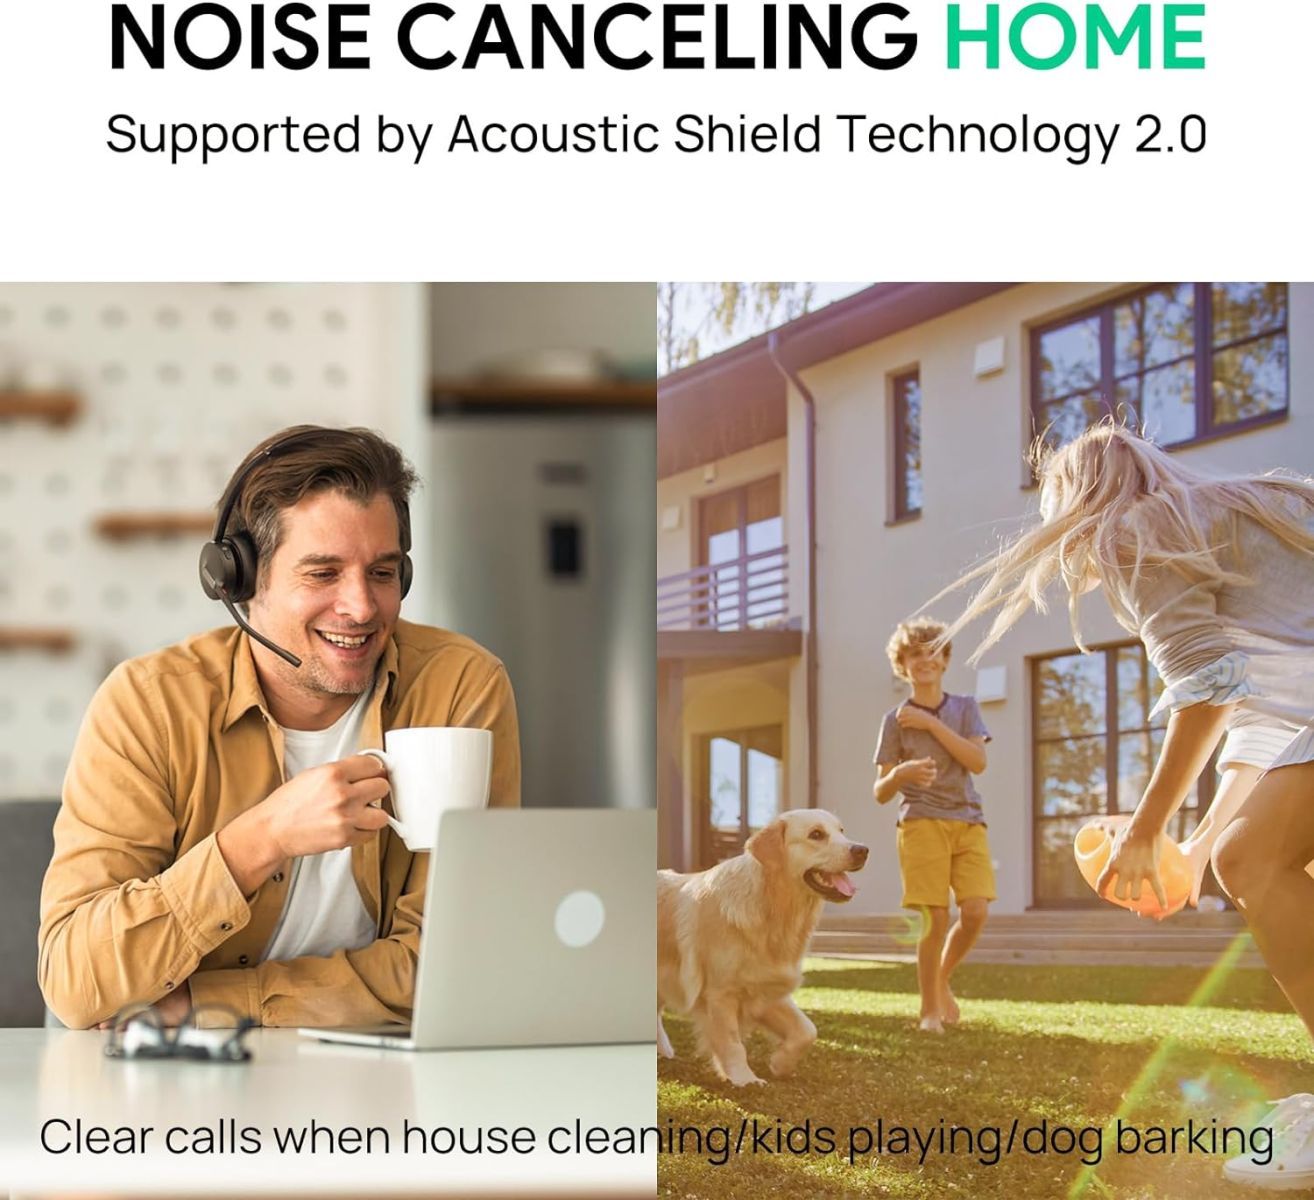 Home Noise Cancelling